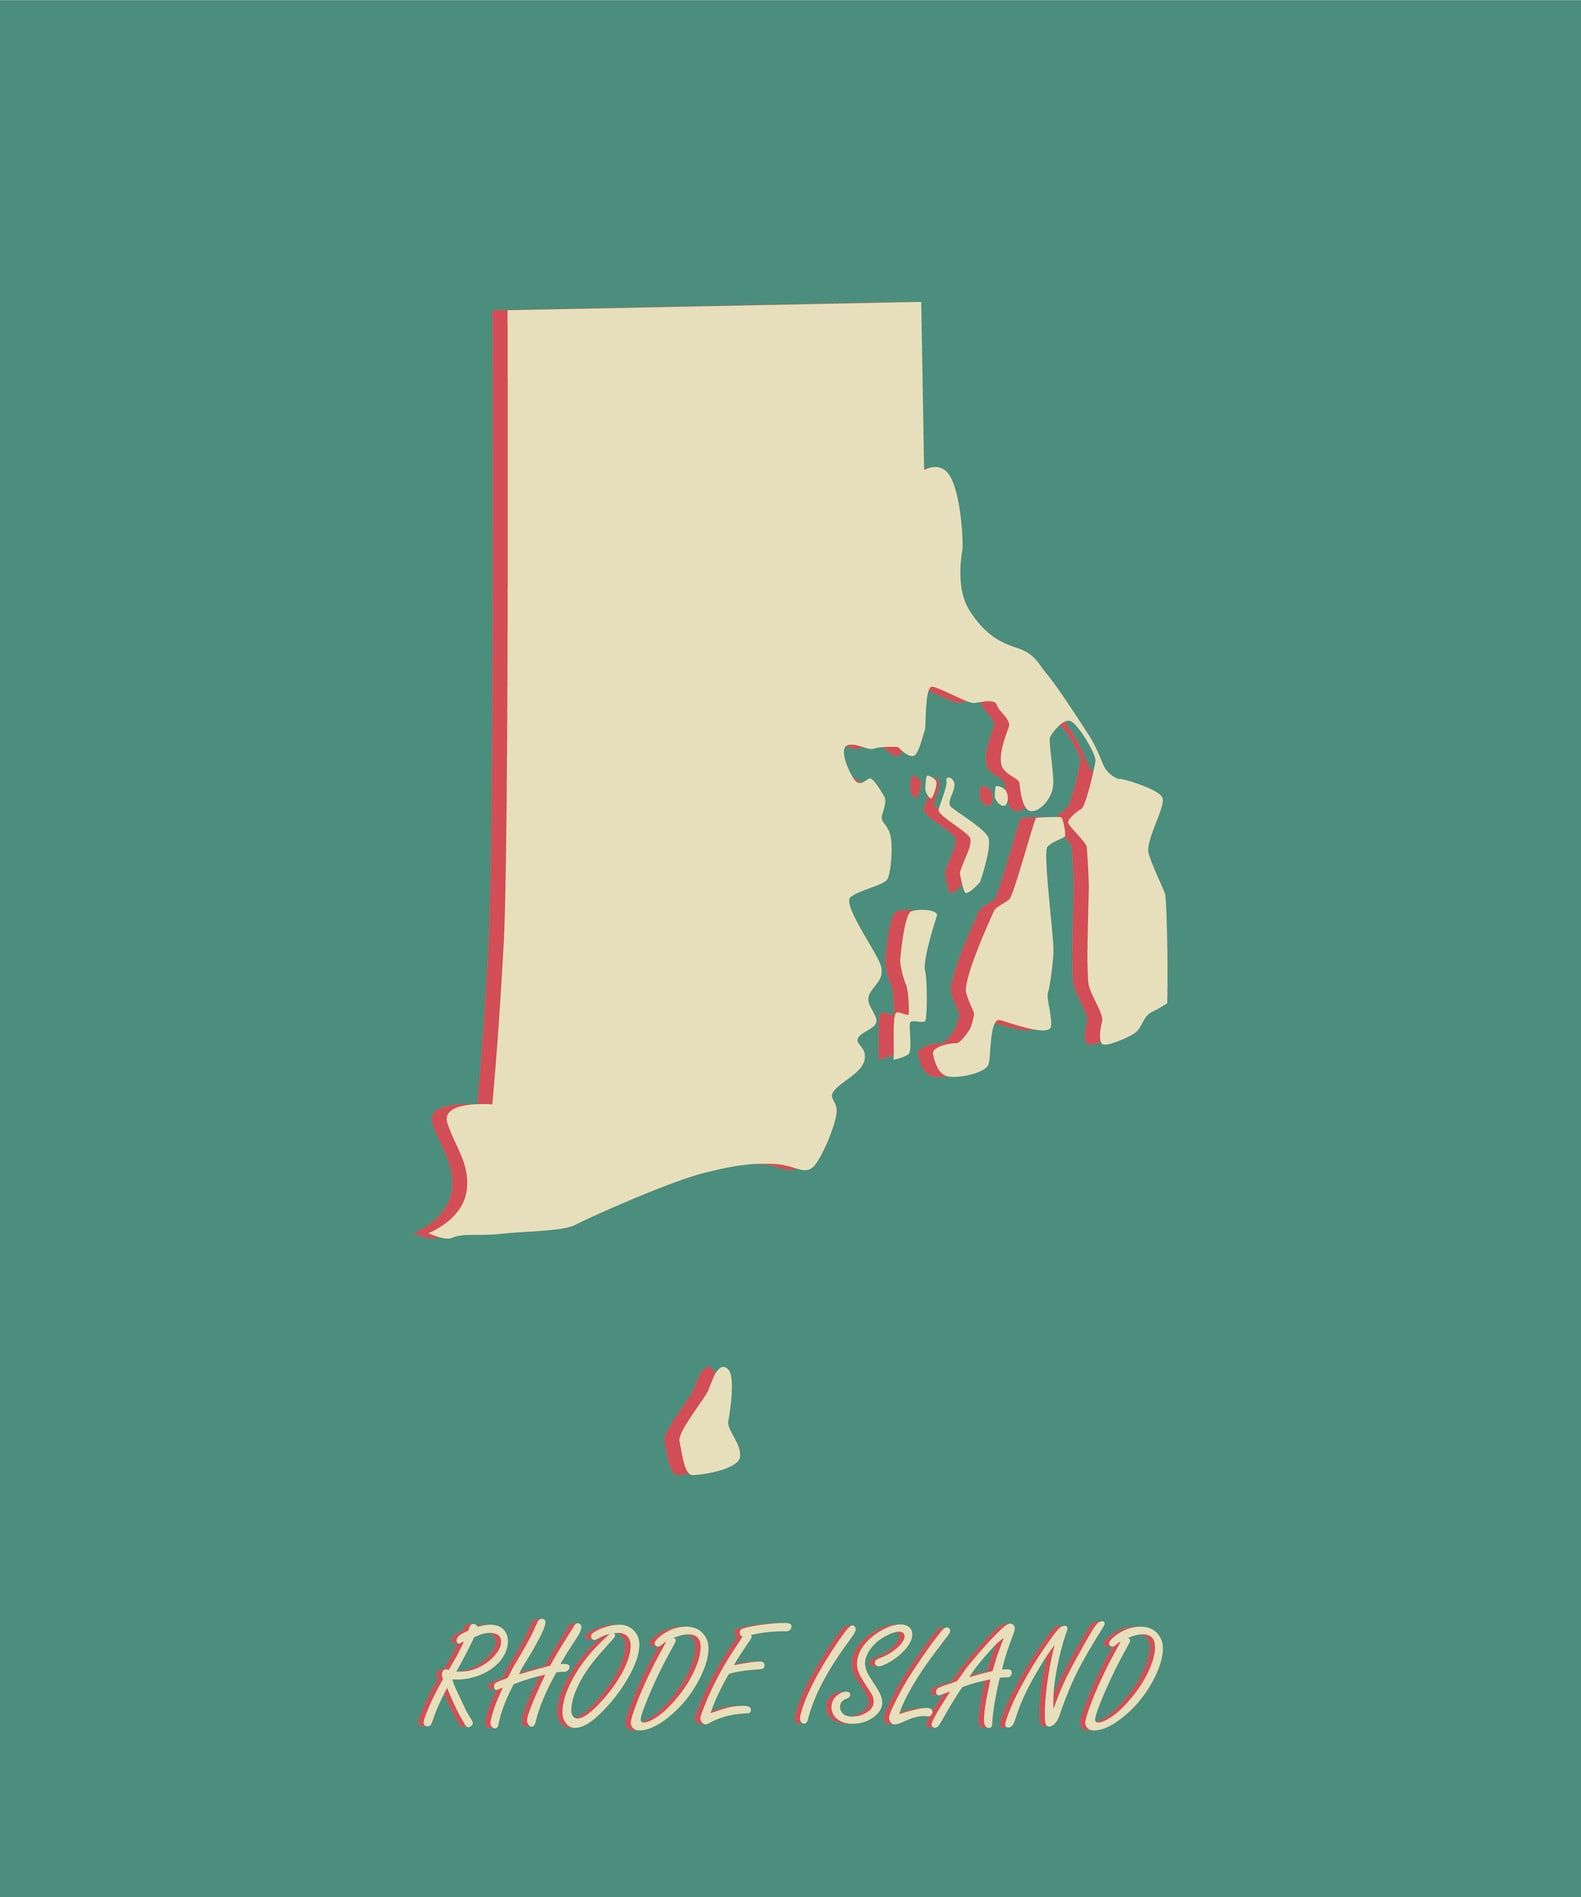 Rhode Island household employment tax and labor law guide